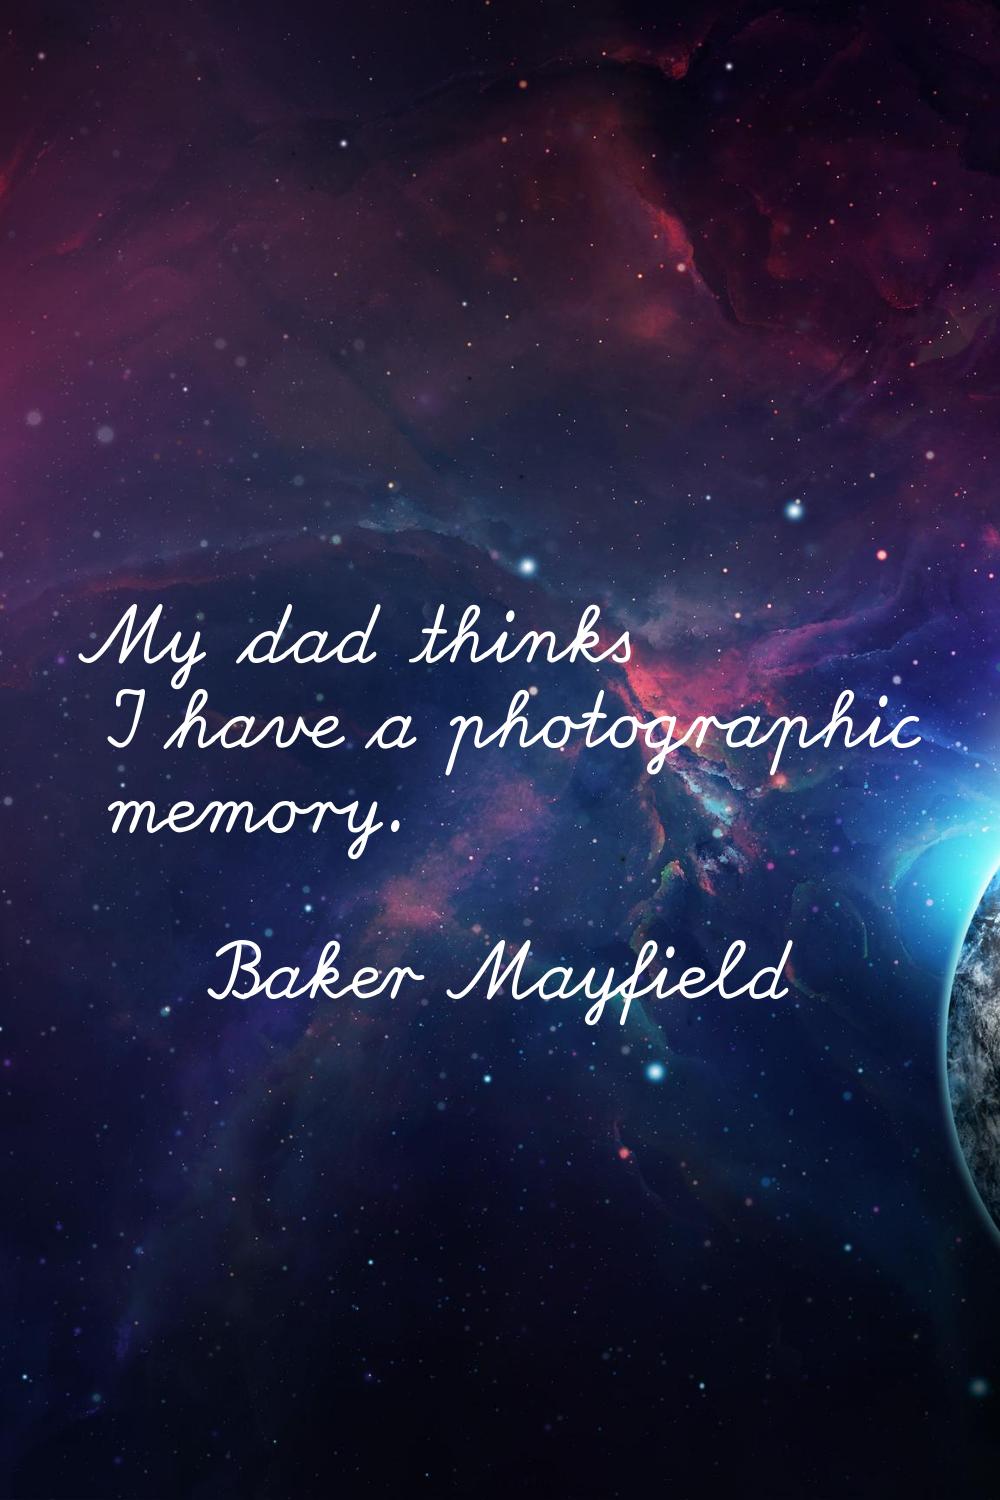 My dad thinks I have a photographic memory.